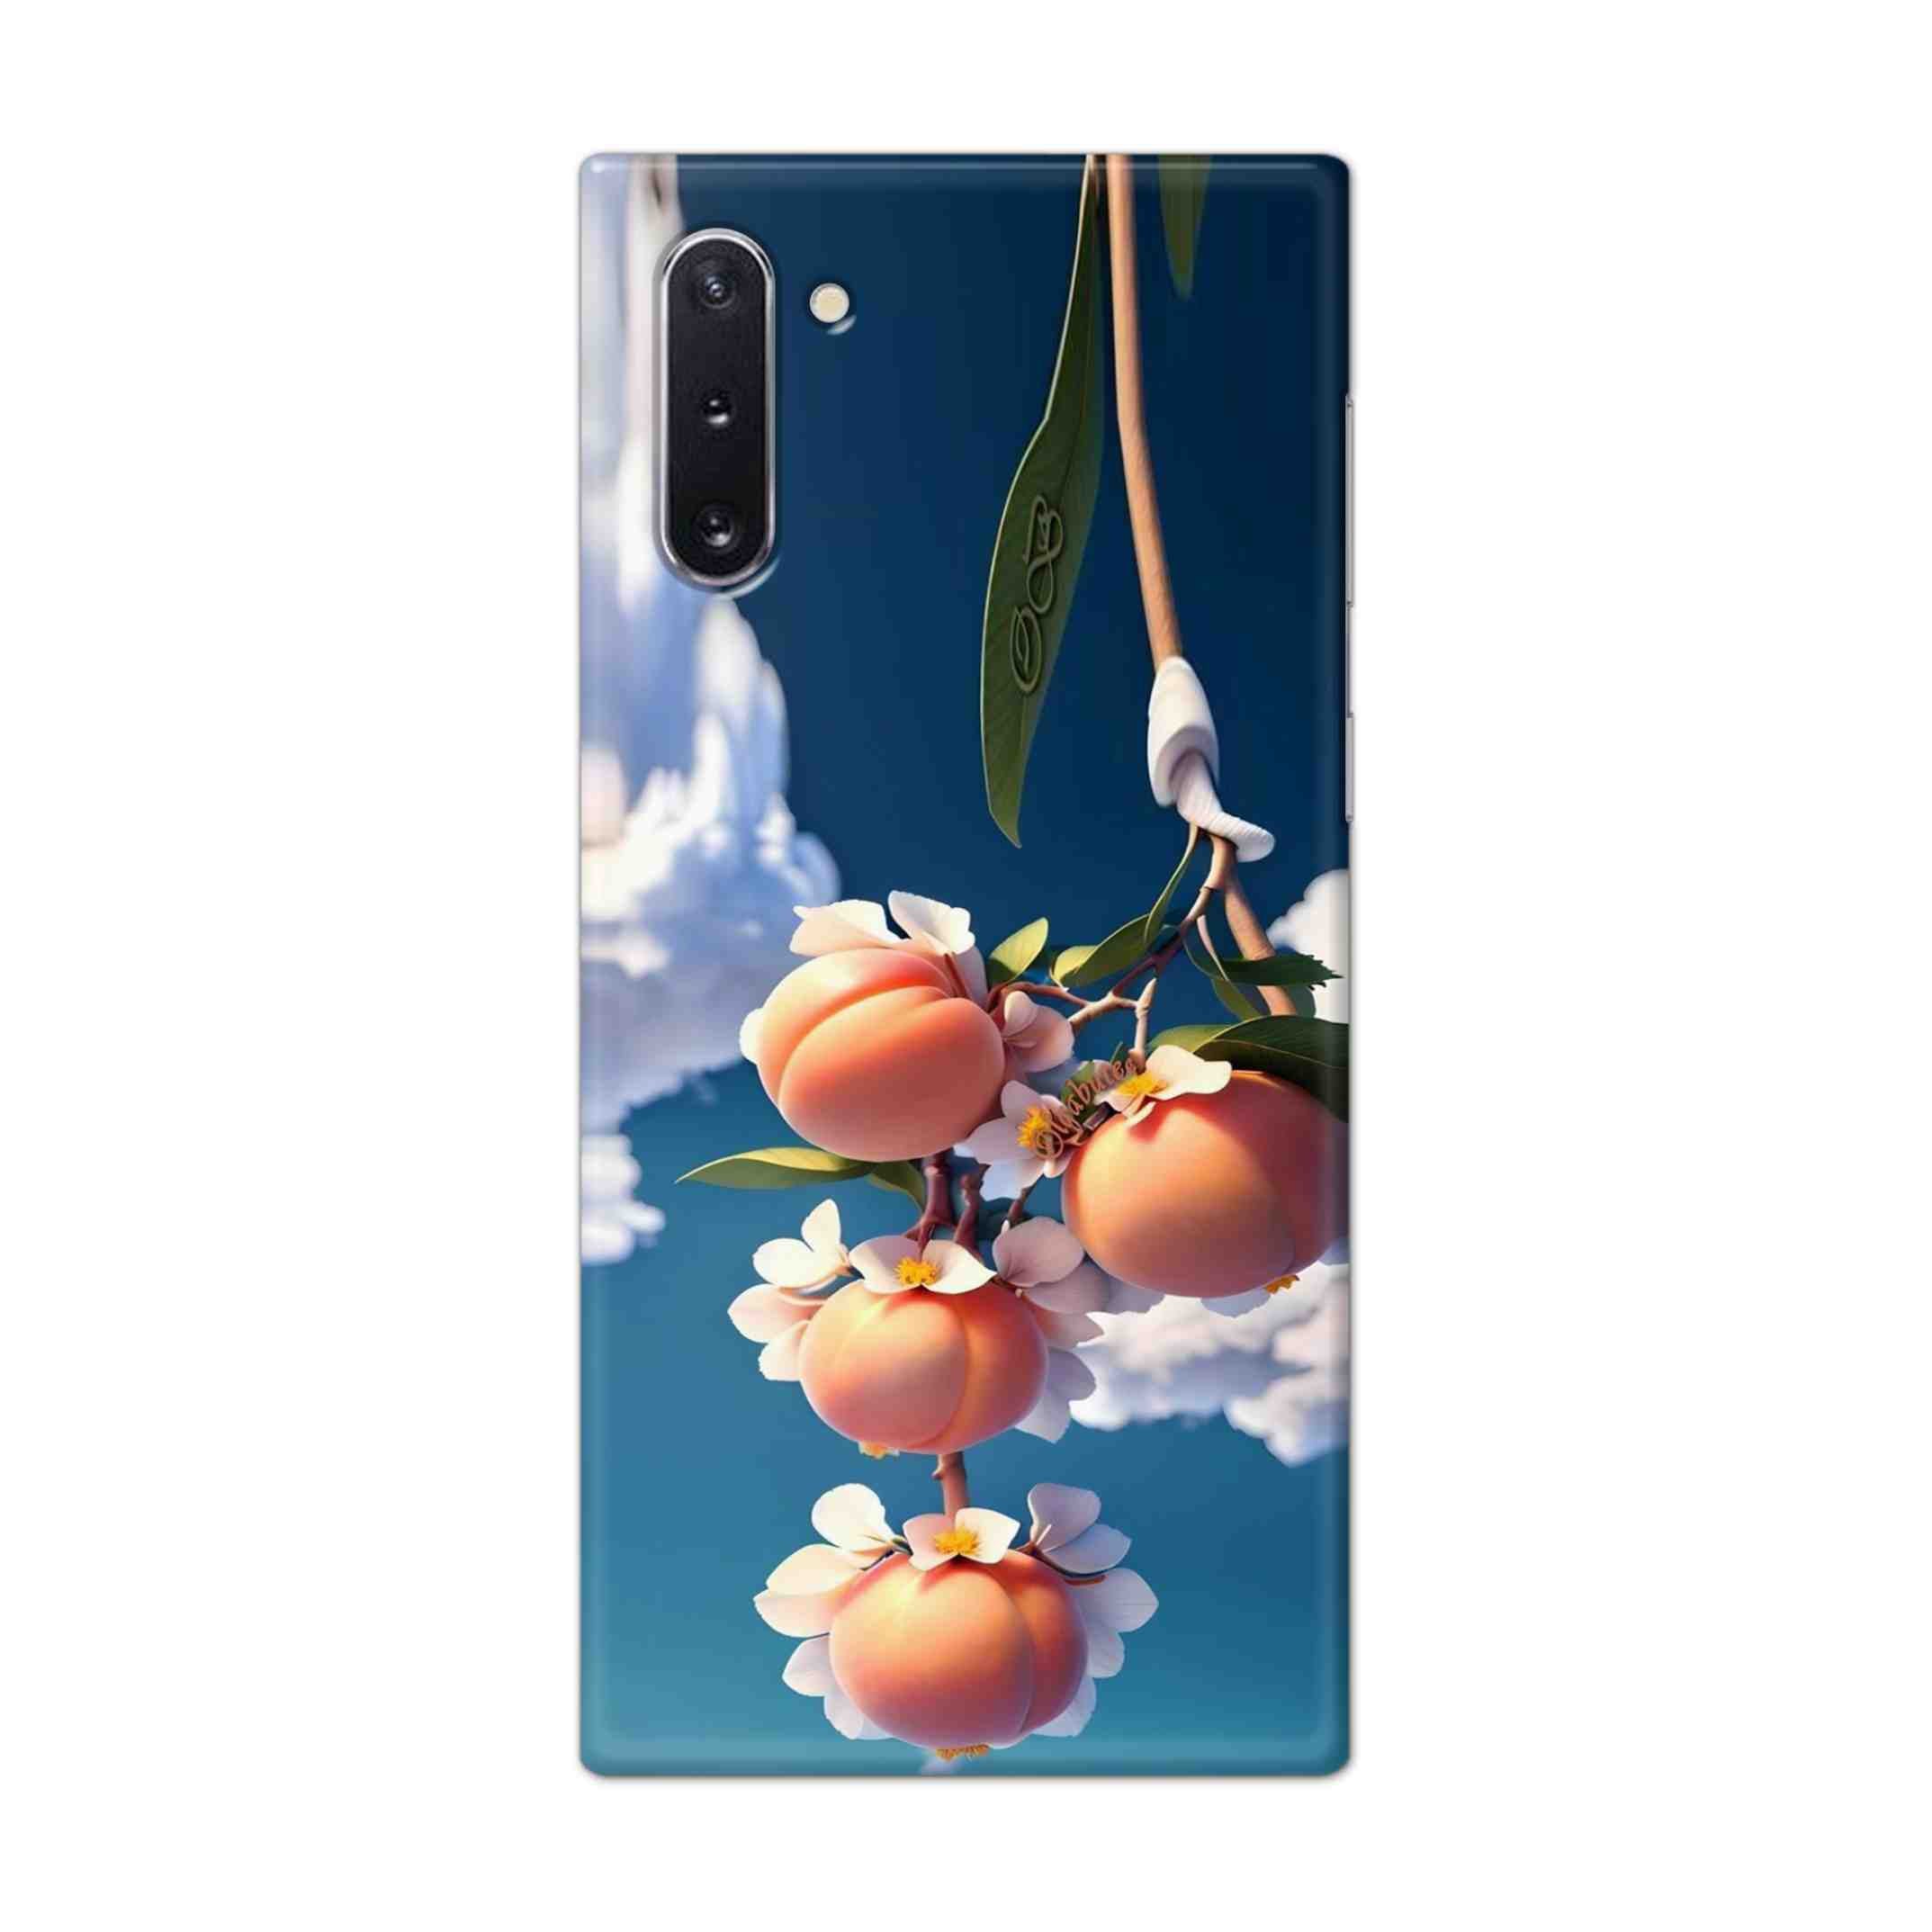 Buy Fruit Hard Back Mobile Phone Case Cover For Samsung Galaxy Note 10 Online